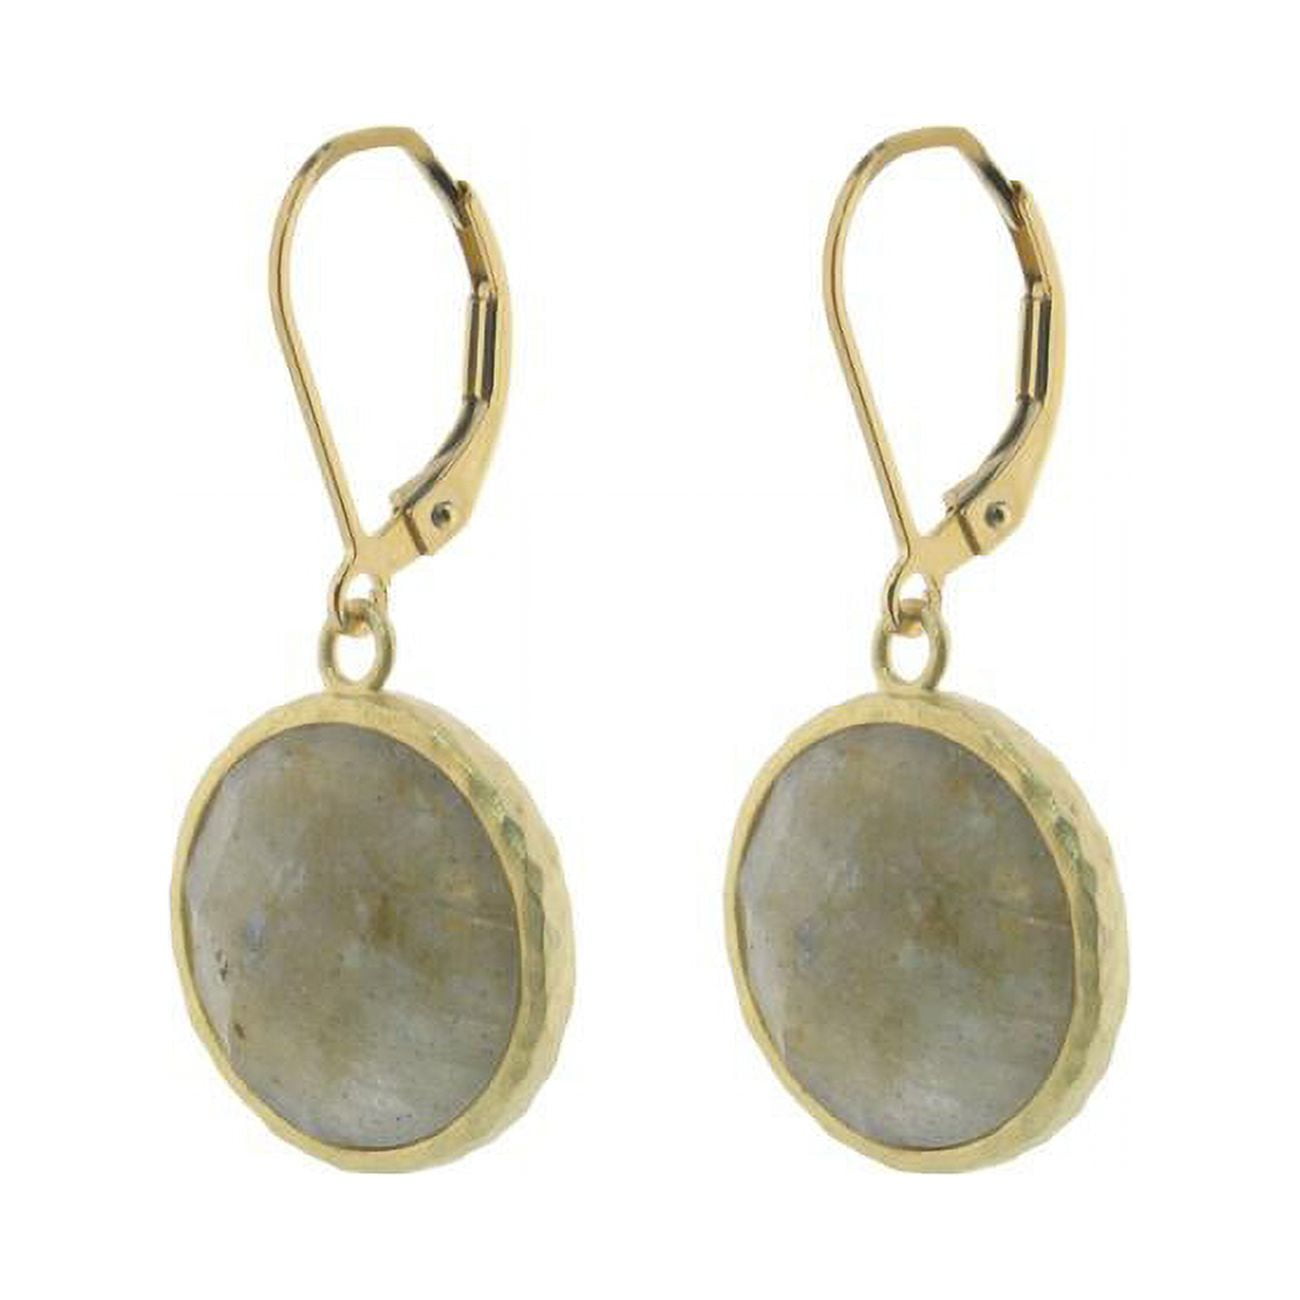 Picture of Fronay 215279 15 mm Grey Labradorite Dangling Silver Vermeil Earrings - Round Natural Stones